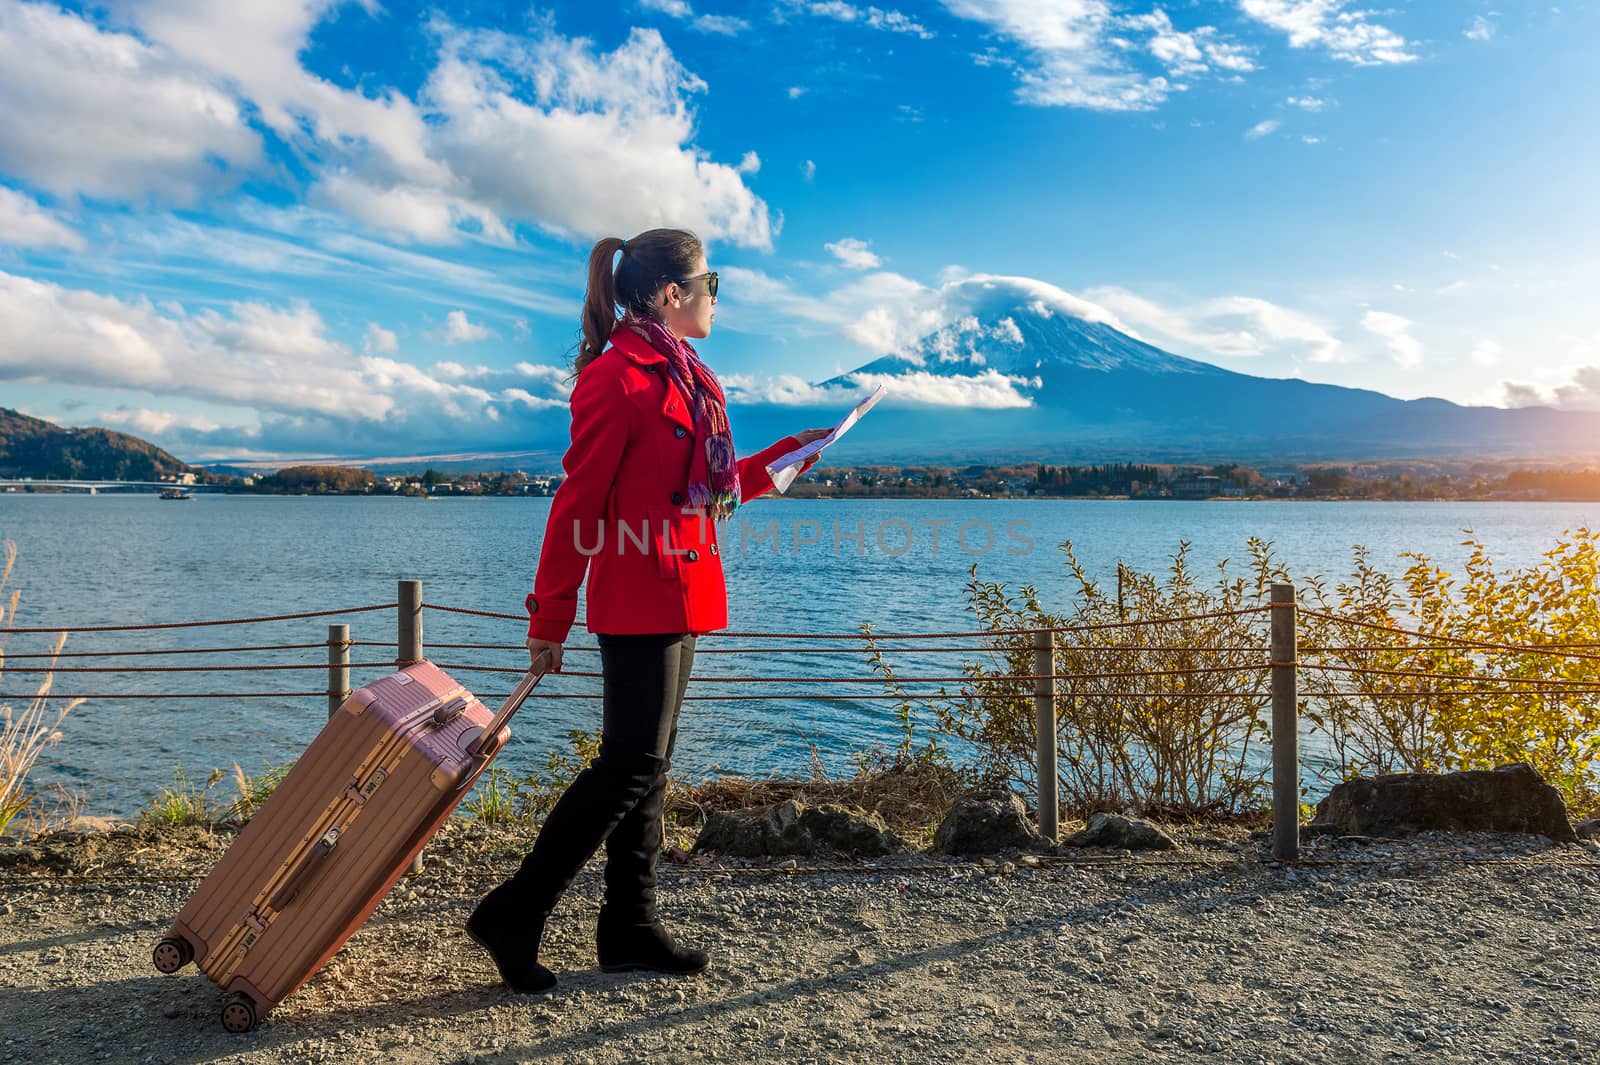 Tourist with baggage and map at Fuji mountain, Kawaguchiko in Japan. by gutarphotoghaphy